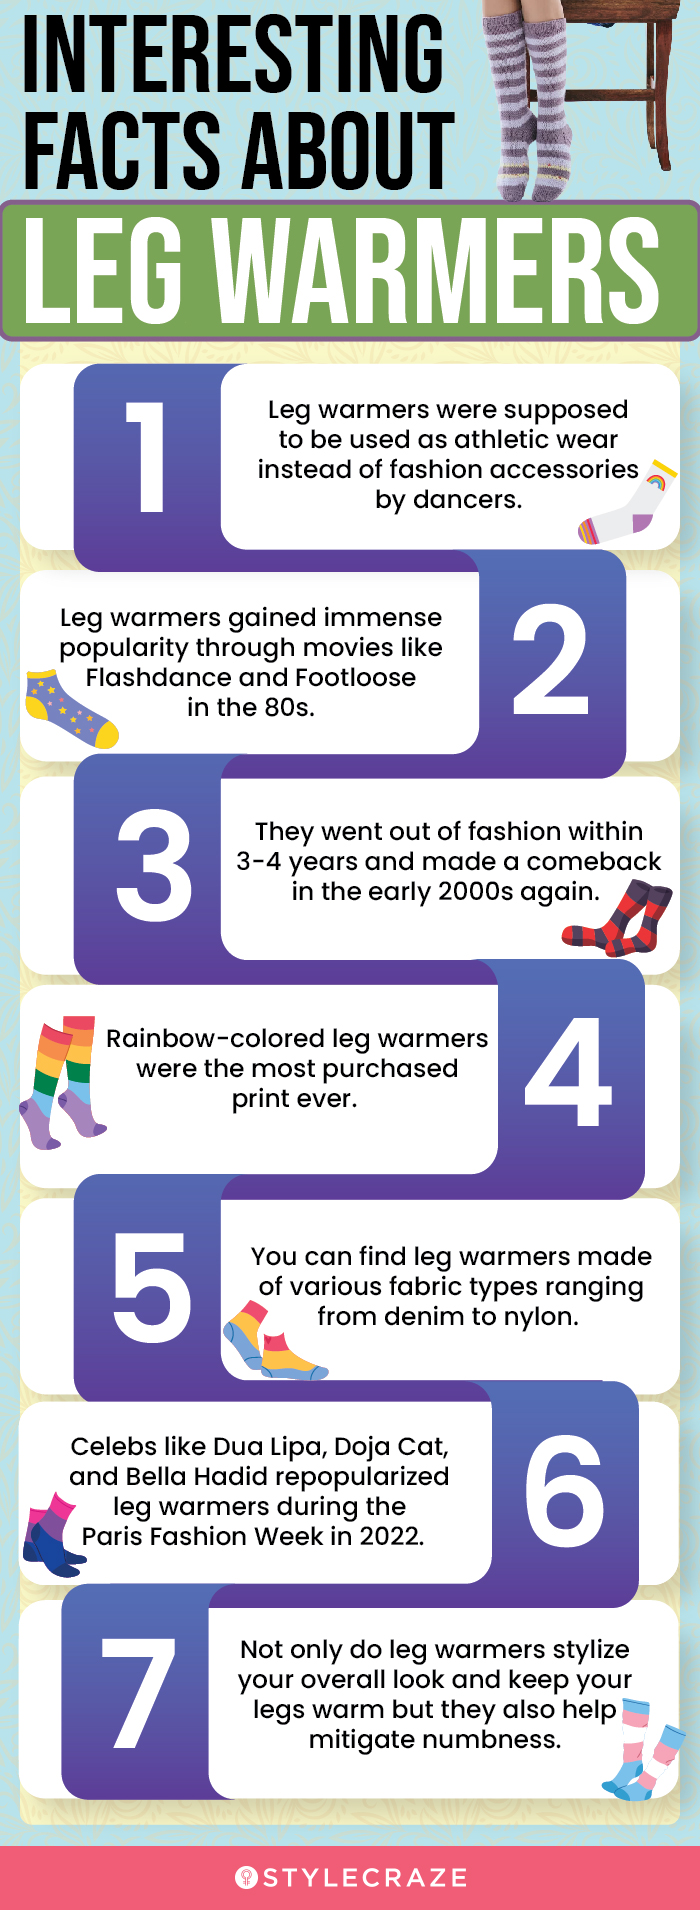 Interesting Facts About Leg Warmers (infographic)